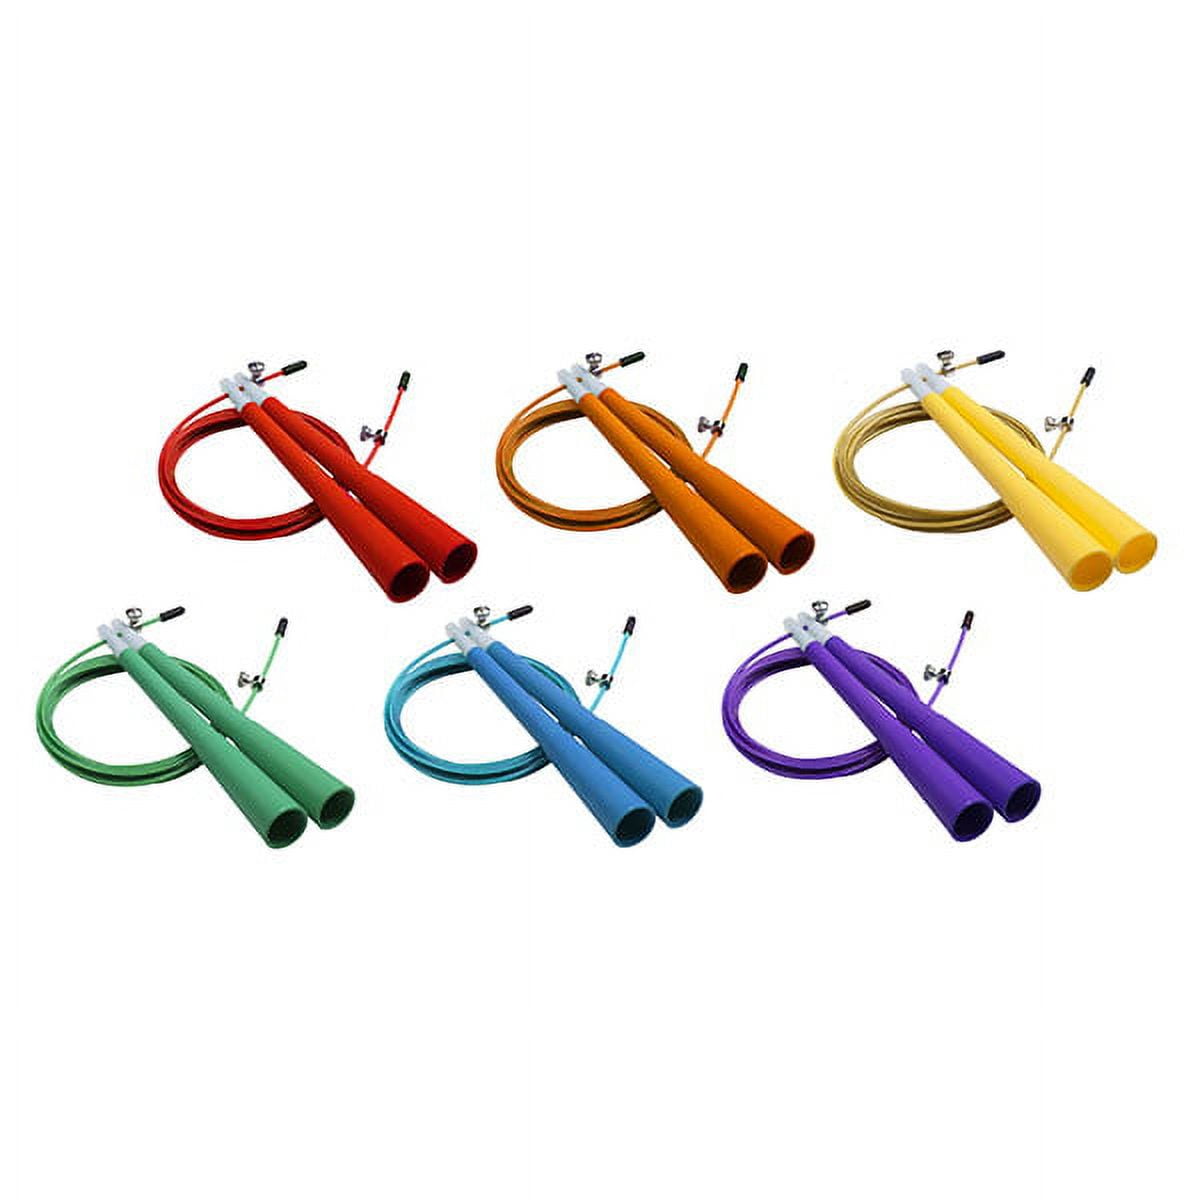 Picture of Champion Sports XRJ9SET Double Bearing Speed Jump Rope, Multicolor - Set of 6